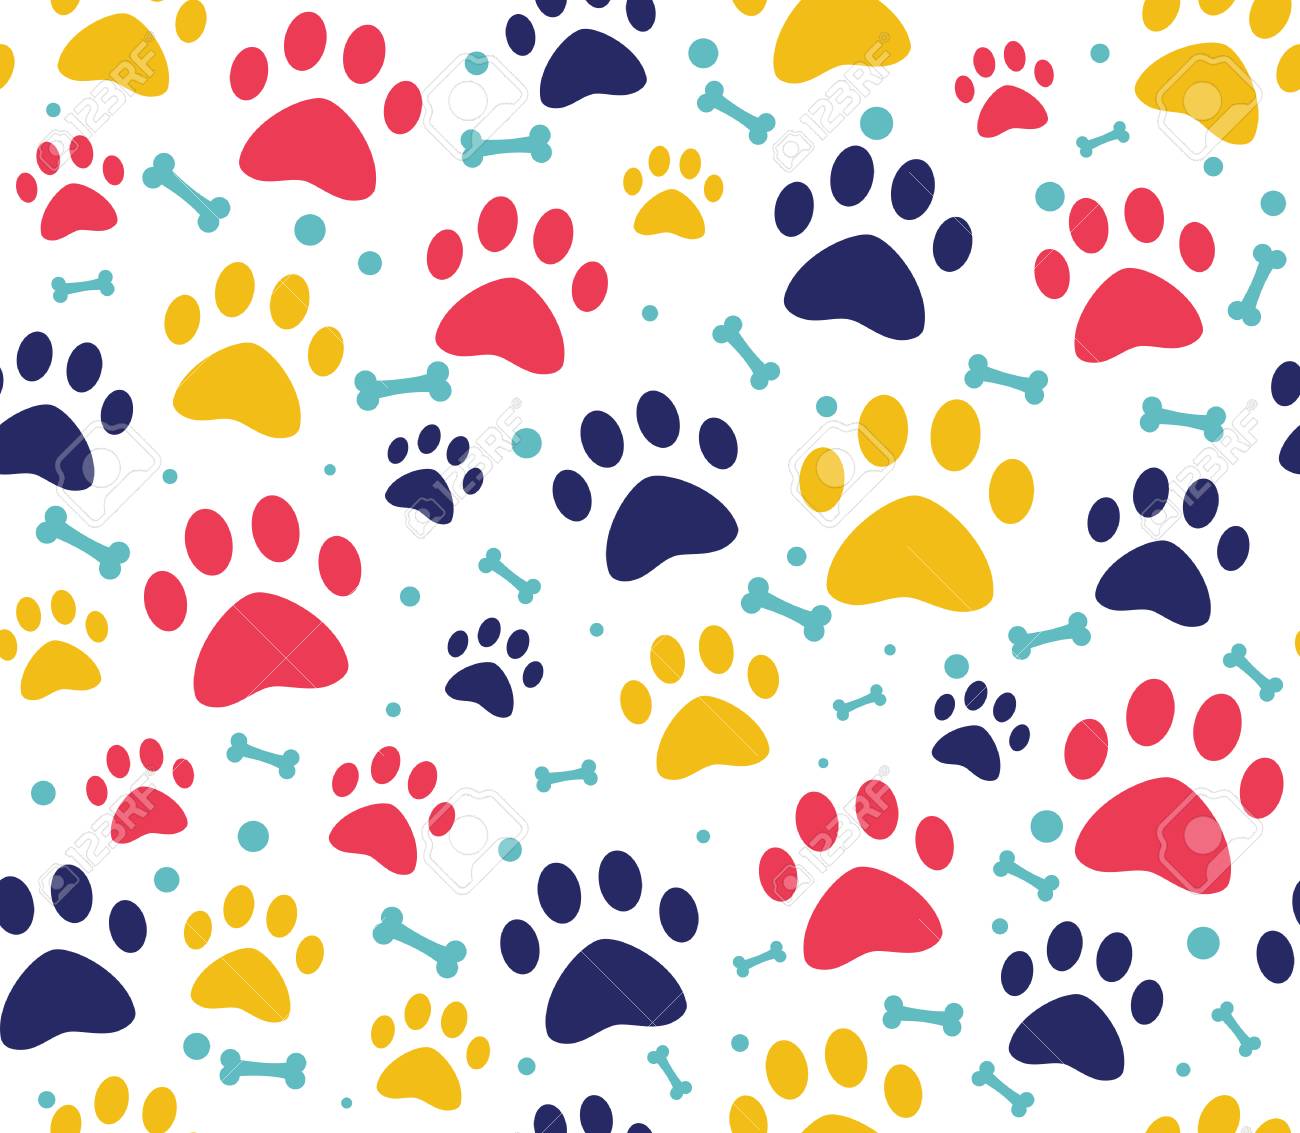 Cat Or Dog Paw Seamless Patterns Background For Pet Shop